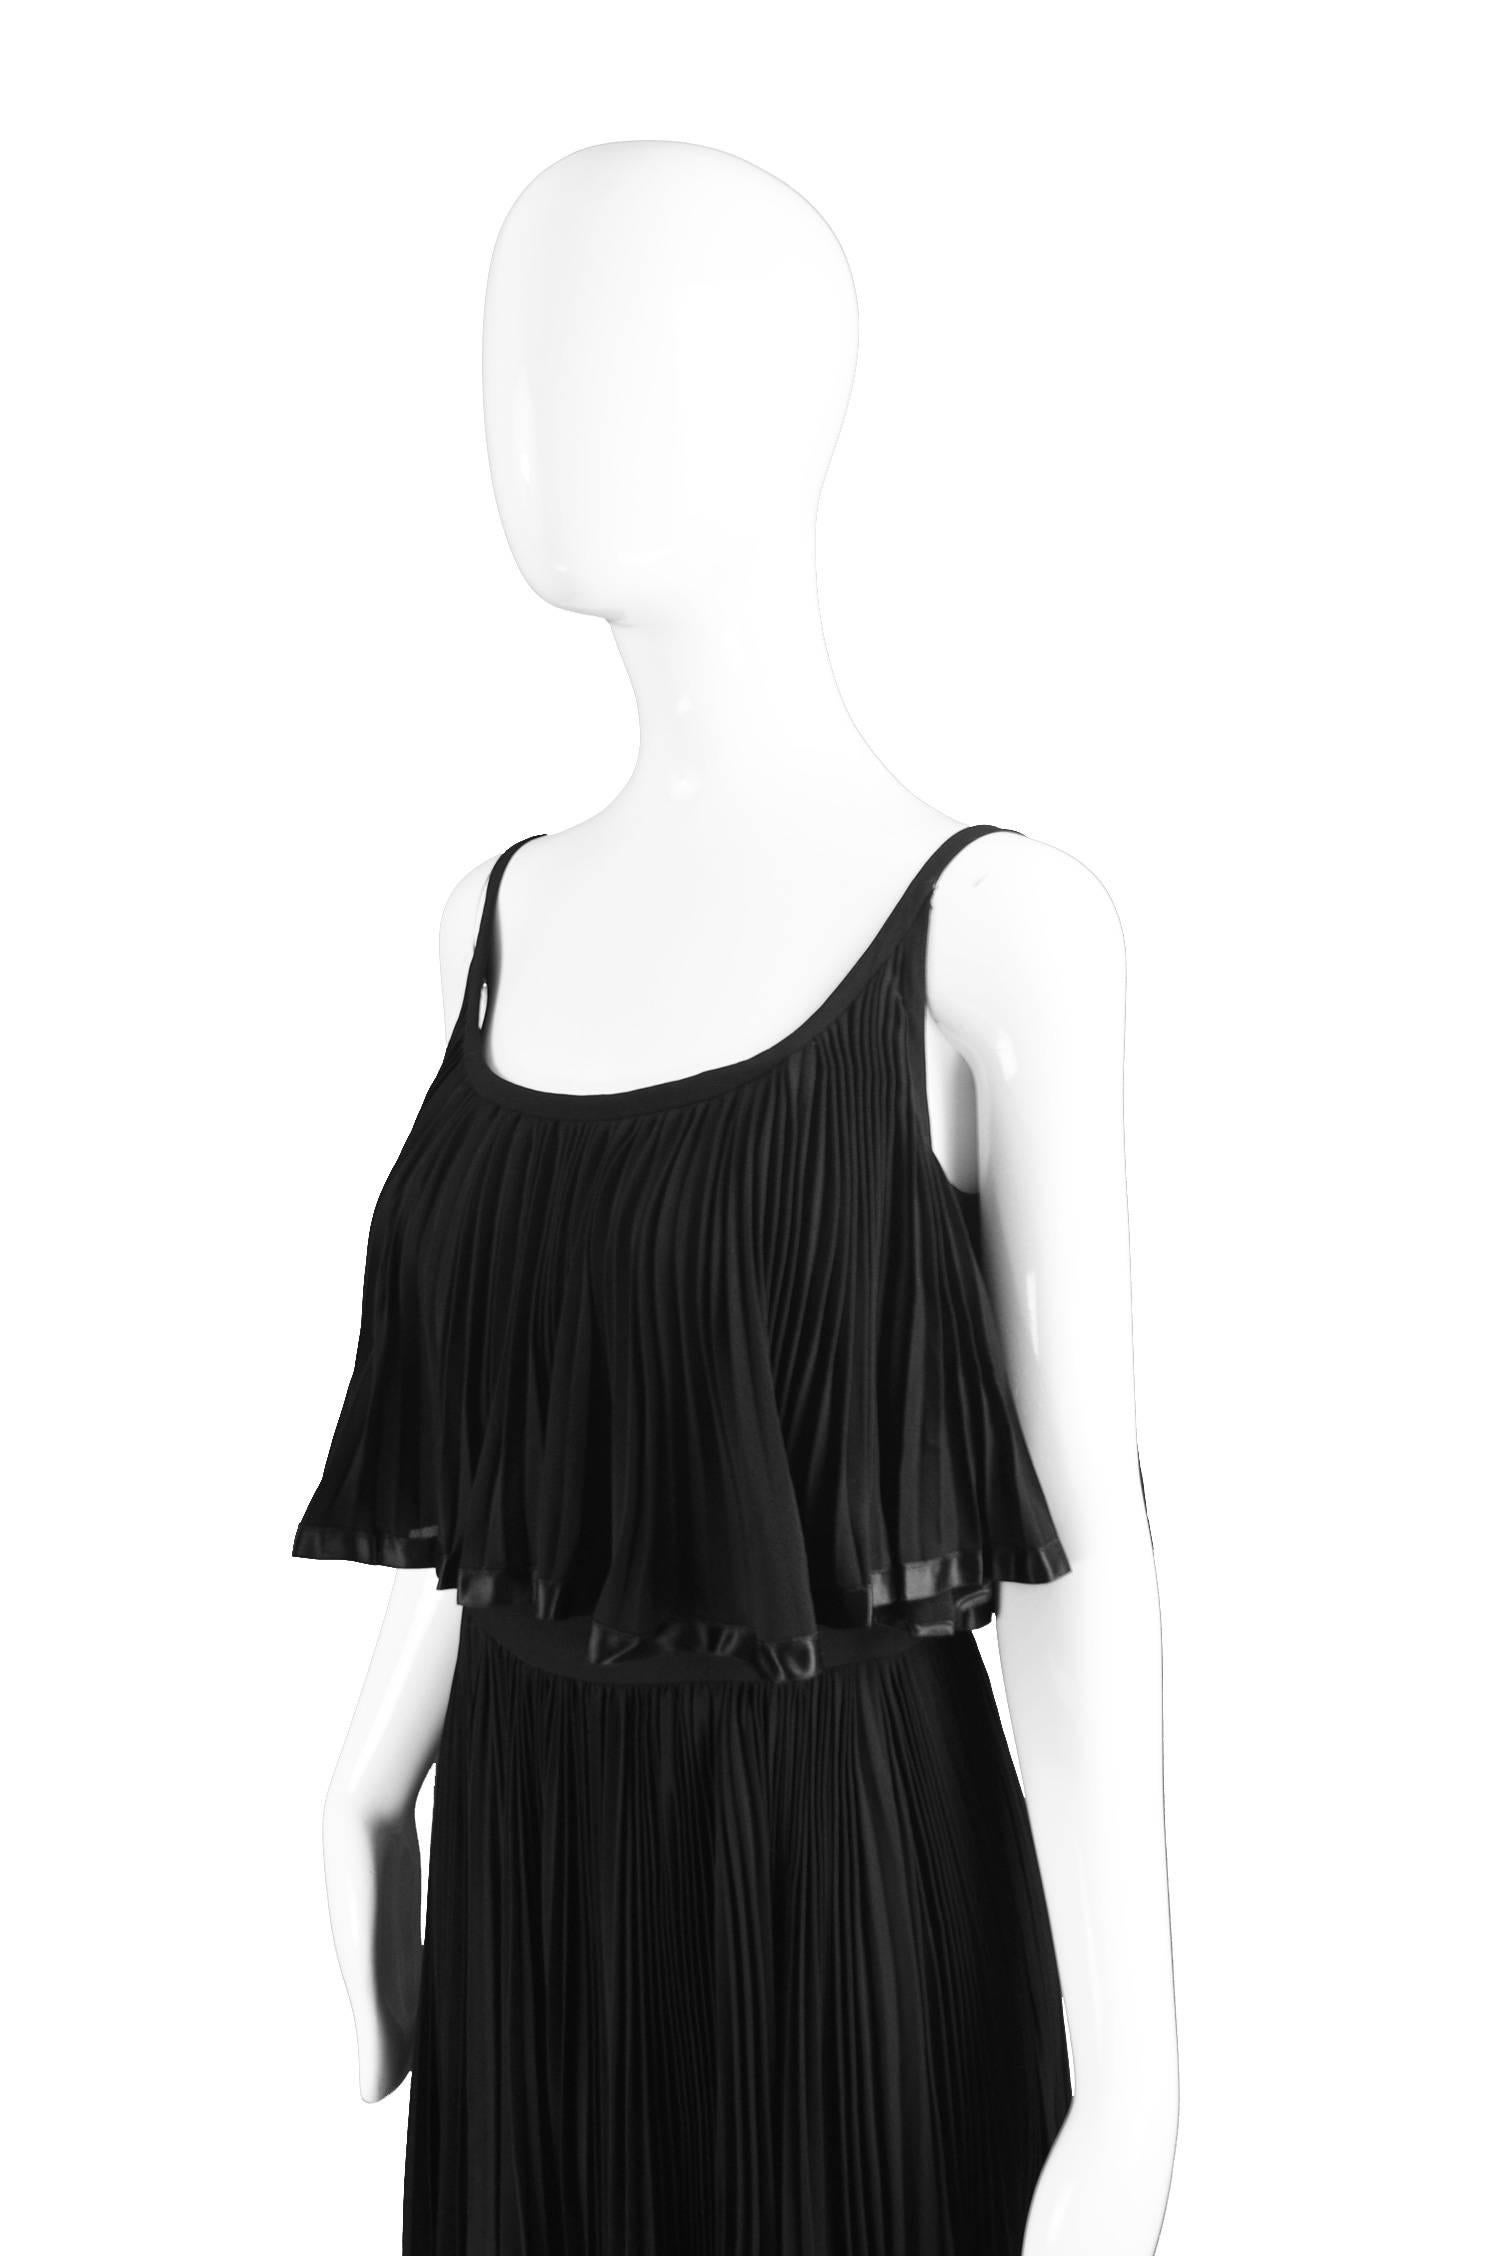 Oleg Cassini Vintage Tiered Pleated Crepe Little Black Dress, 1960s In Excellent Condition For Sale In Doncaster, South Yorkshire